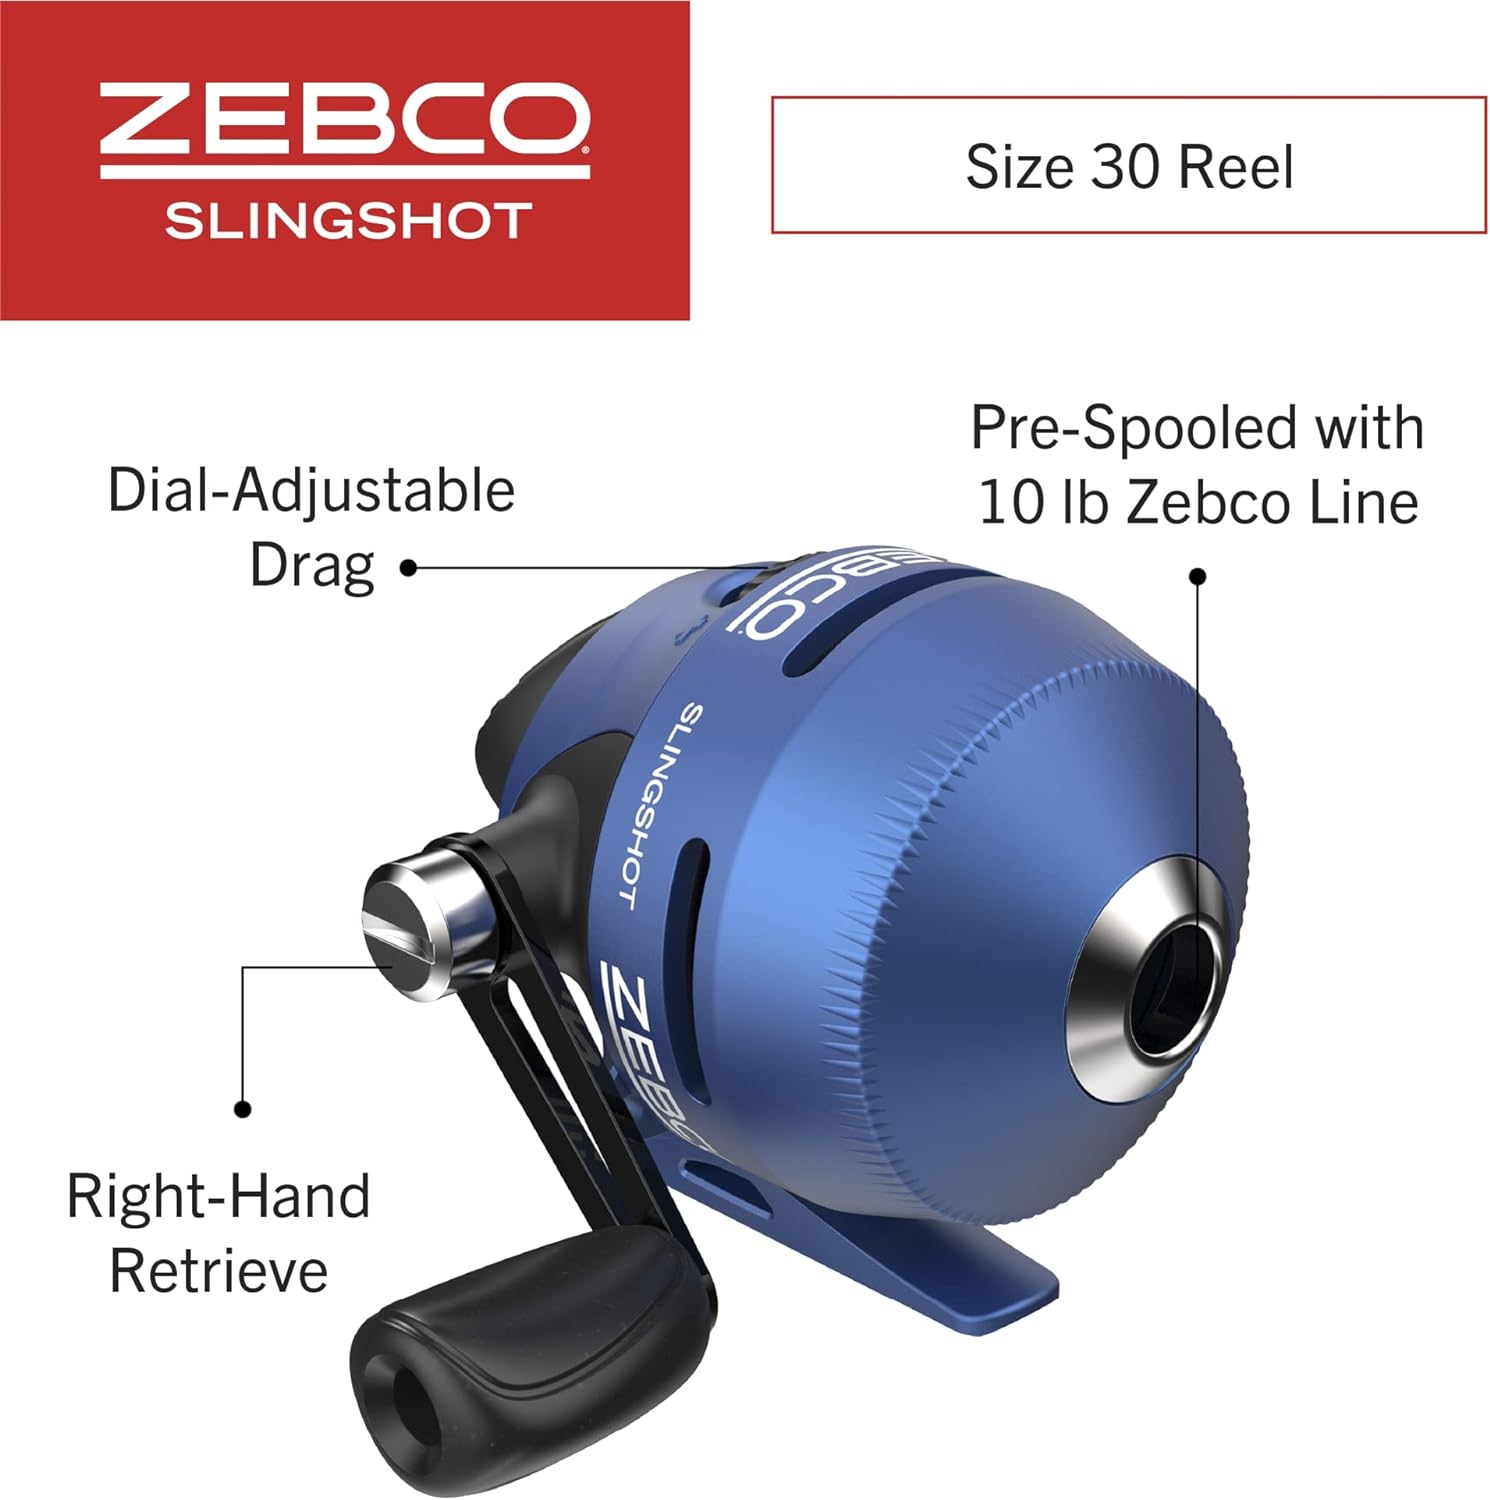 Zebco Slingshot Spincast Reel And Fishing Rod Combo, 5-Foot 6-Inch 2-Piece Fishing Pole, Size 30 Reel, Right-Hand Retrieve, Pre-Spooled With 10-Pound Zebco Line